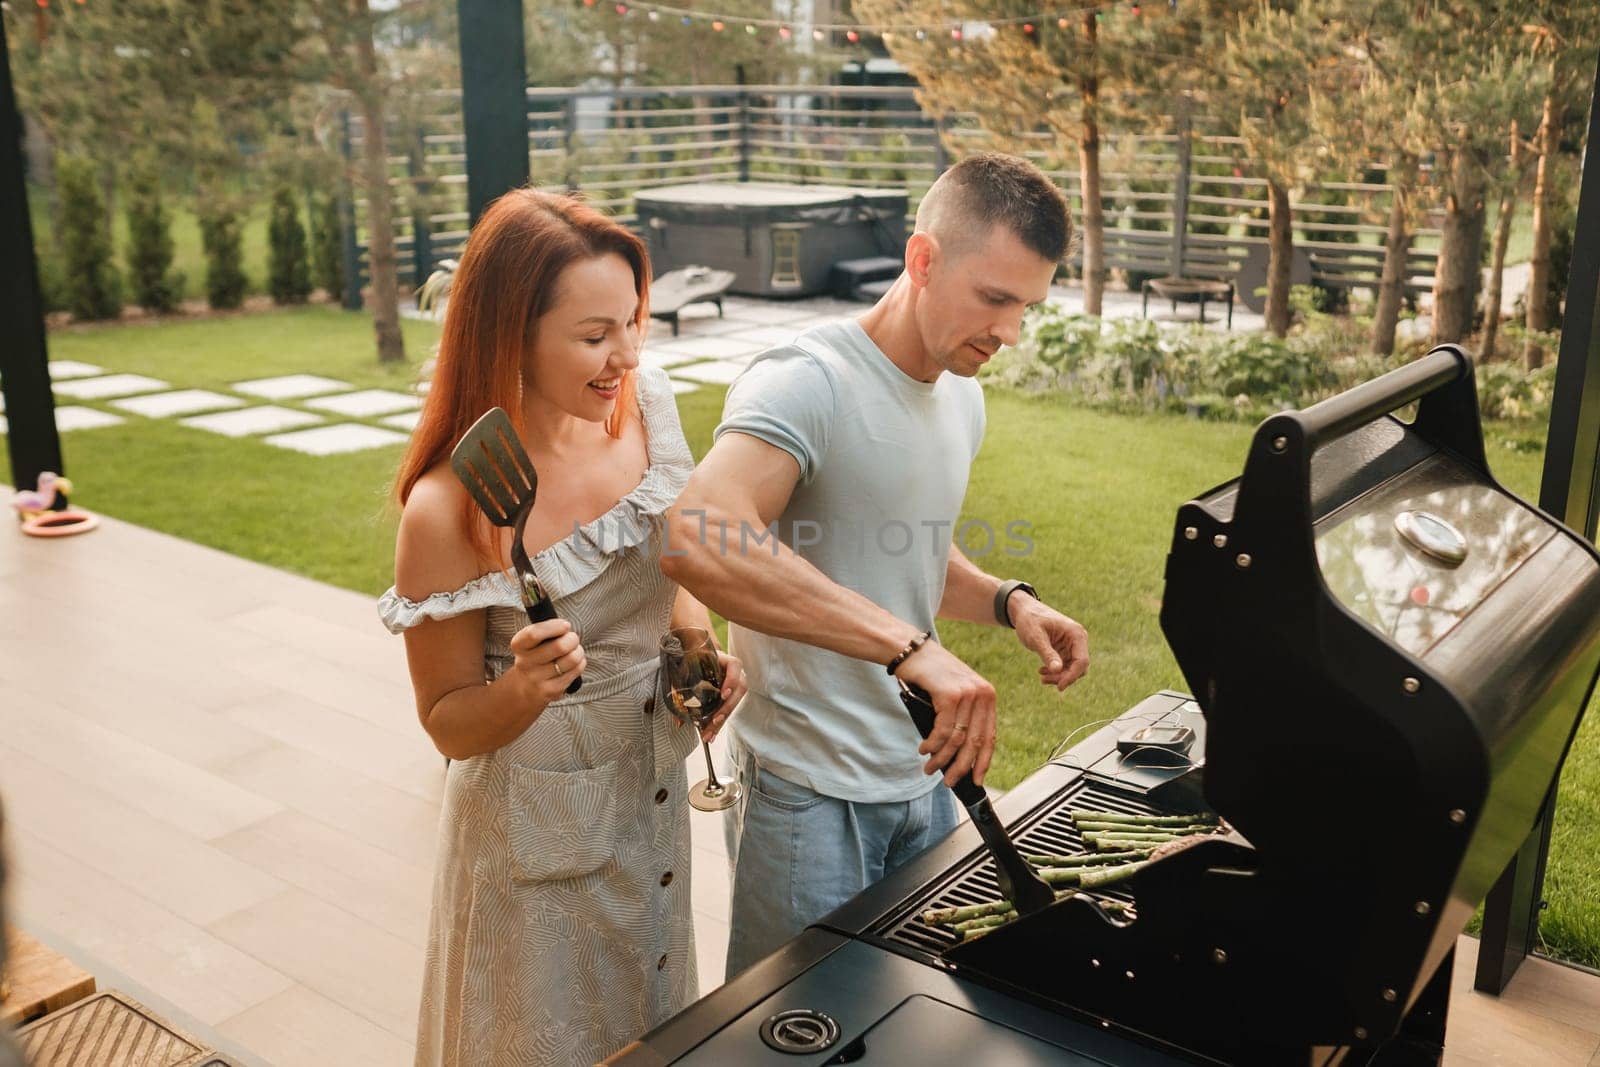 A married couple cooks grilled meat together on their terrace.